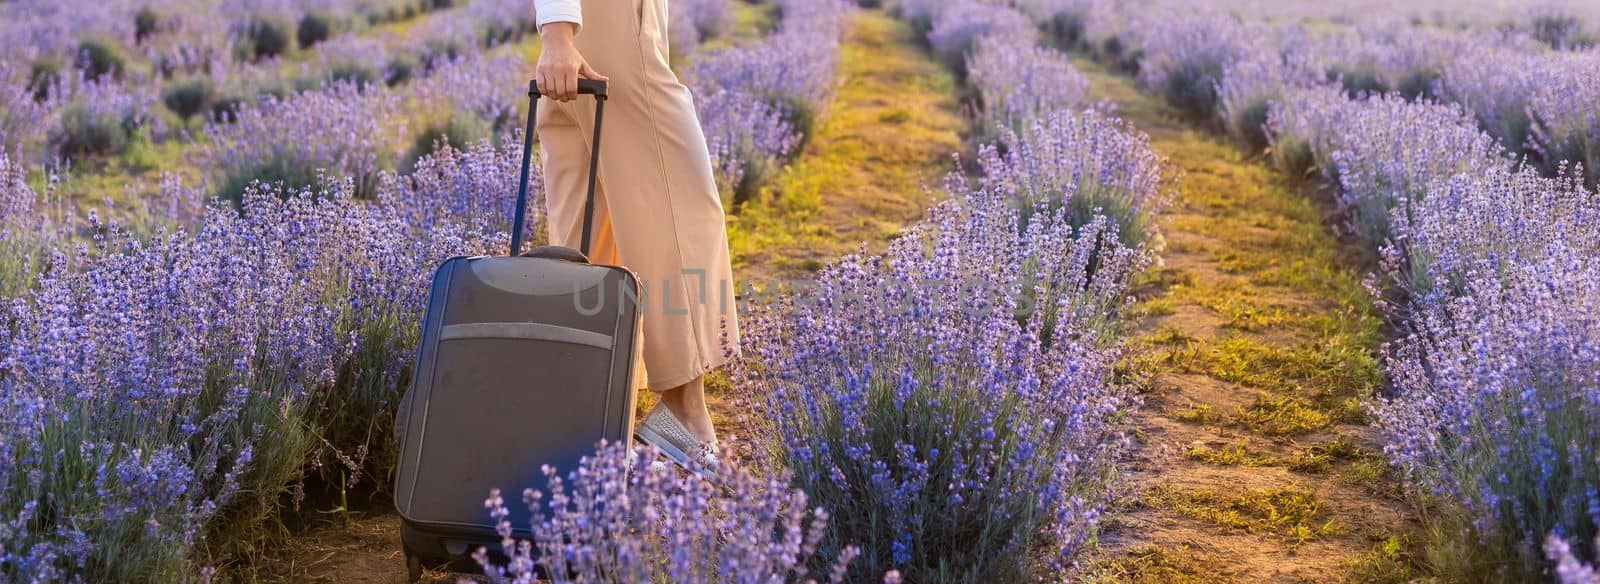 Full length portrait of pretty young lady, wearing light dress, straw hat, walking with bag in summer flowering lavender field, enjoying scent of lavender.